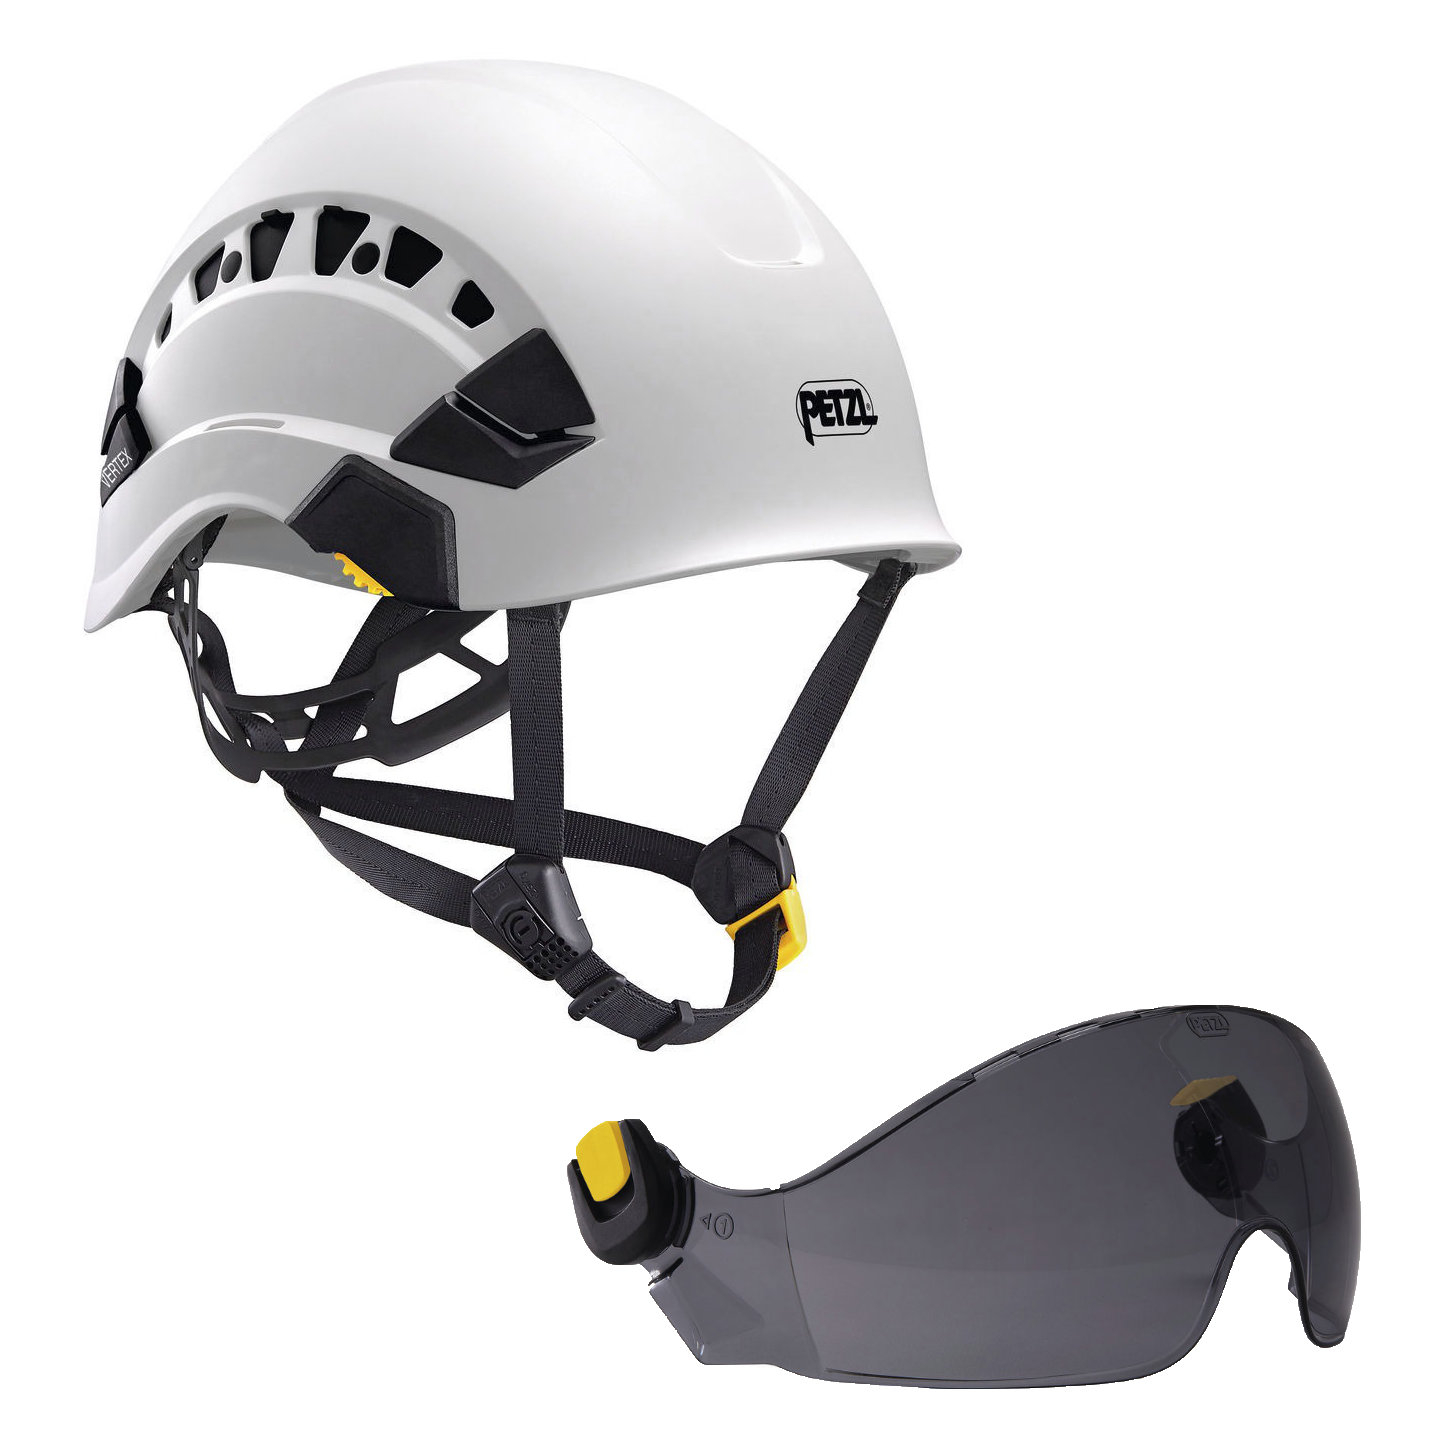 Purchase Petzl Vertex Vent Helmet White (A010CA00)  Vizir Smoke Visor  (A015BA00) online today. Best PPE and safety products in Australia.